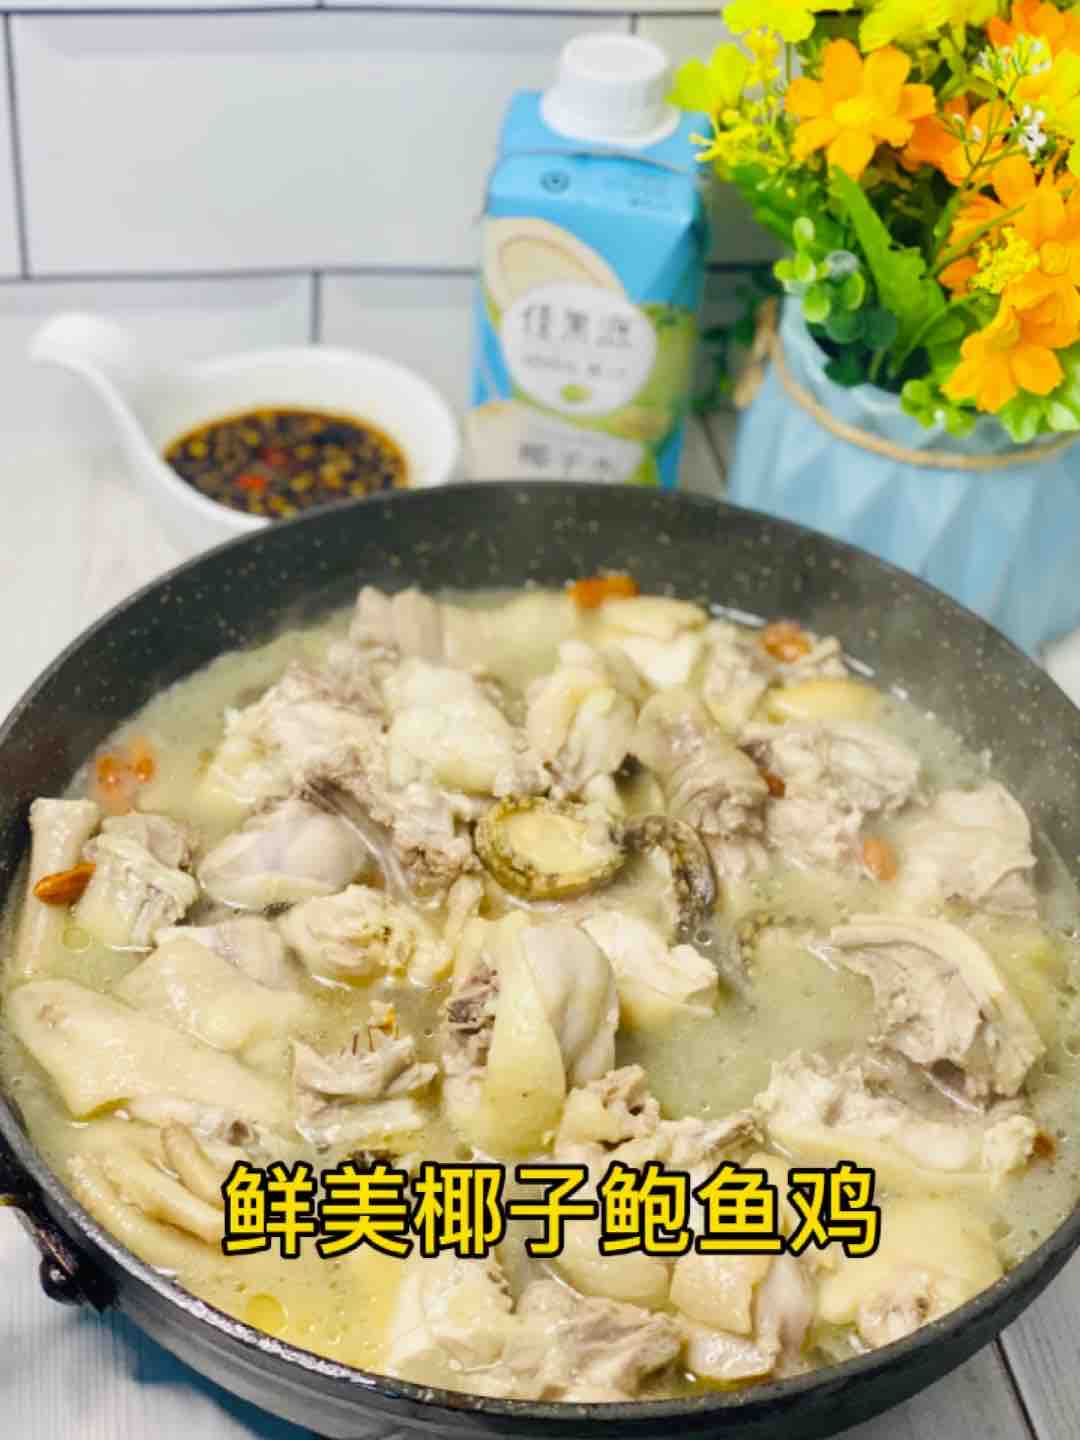 Eat Delicious Coconut Abalone Chicken at Home without Leaving Home